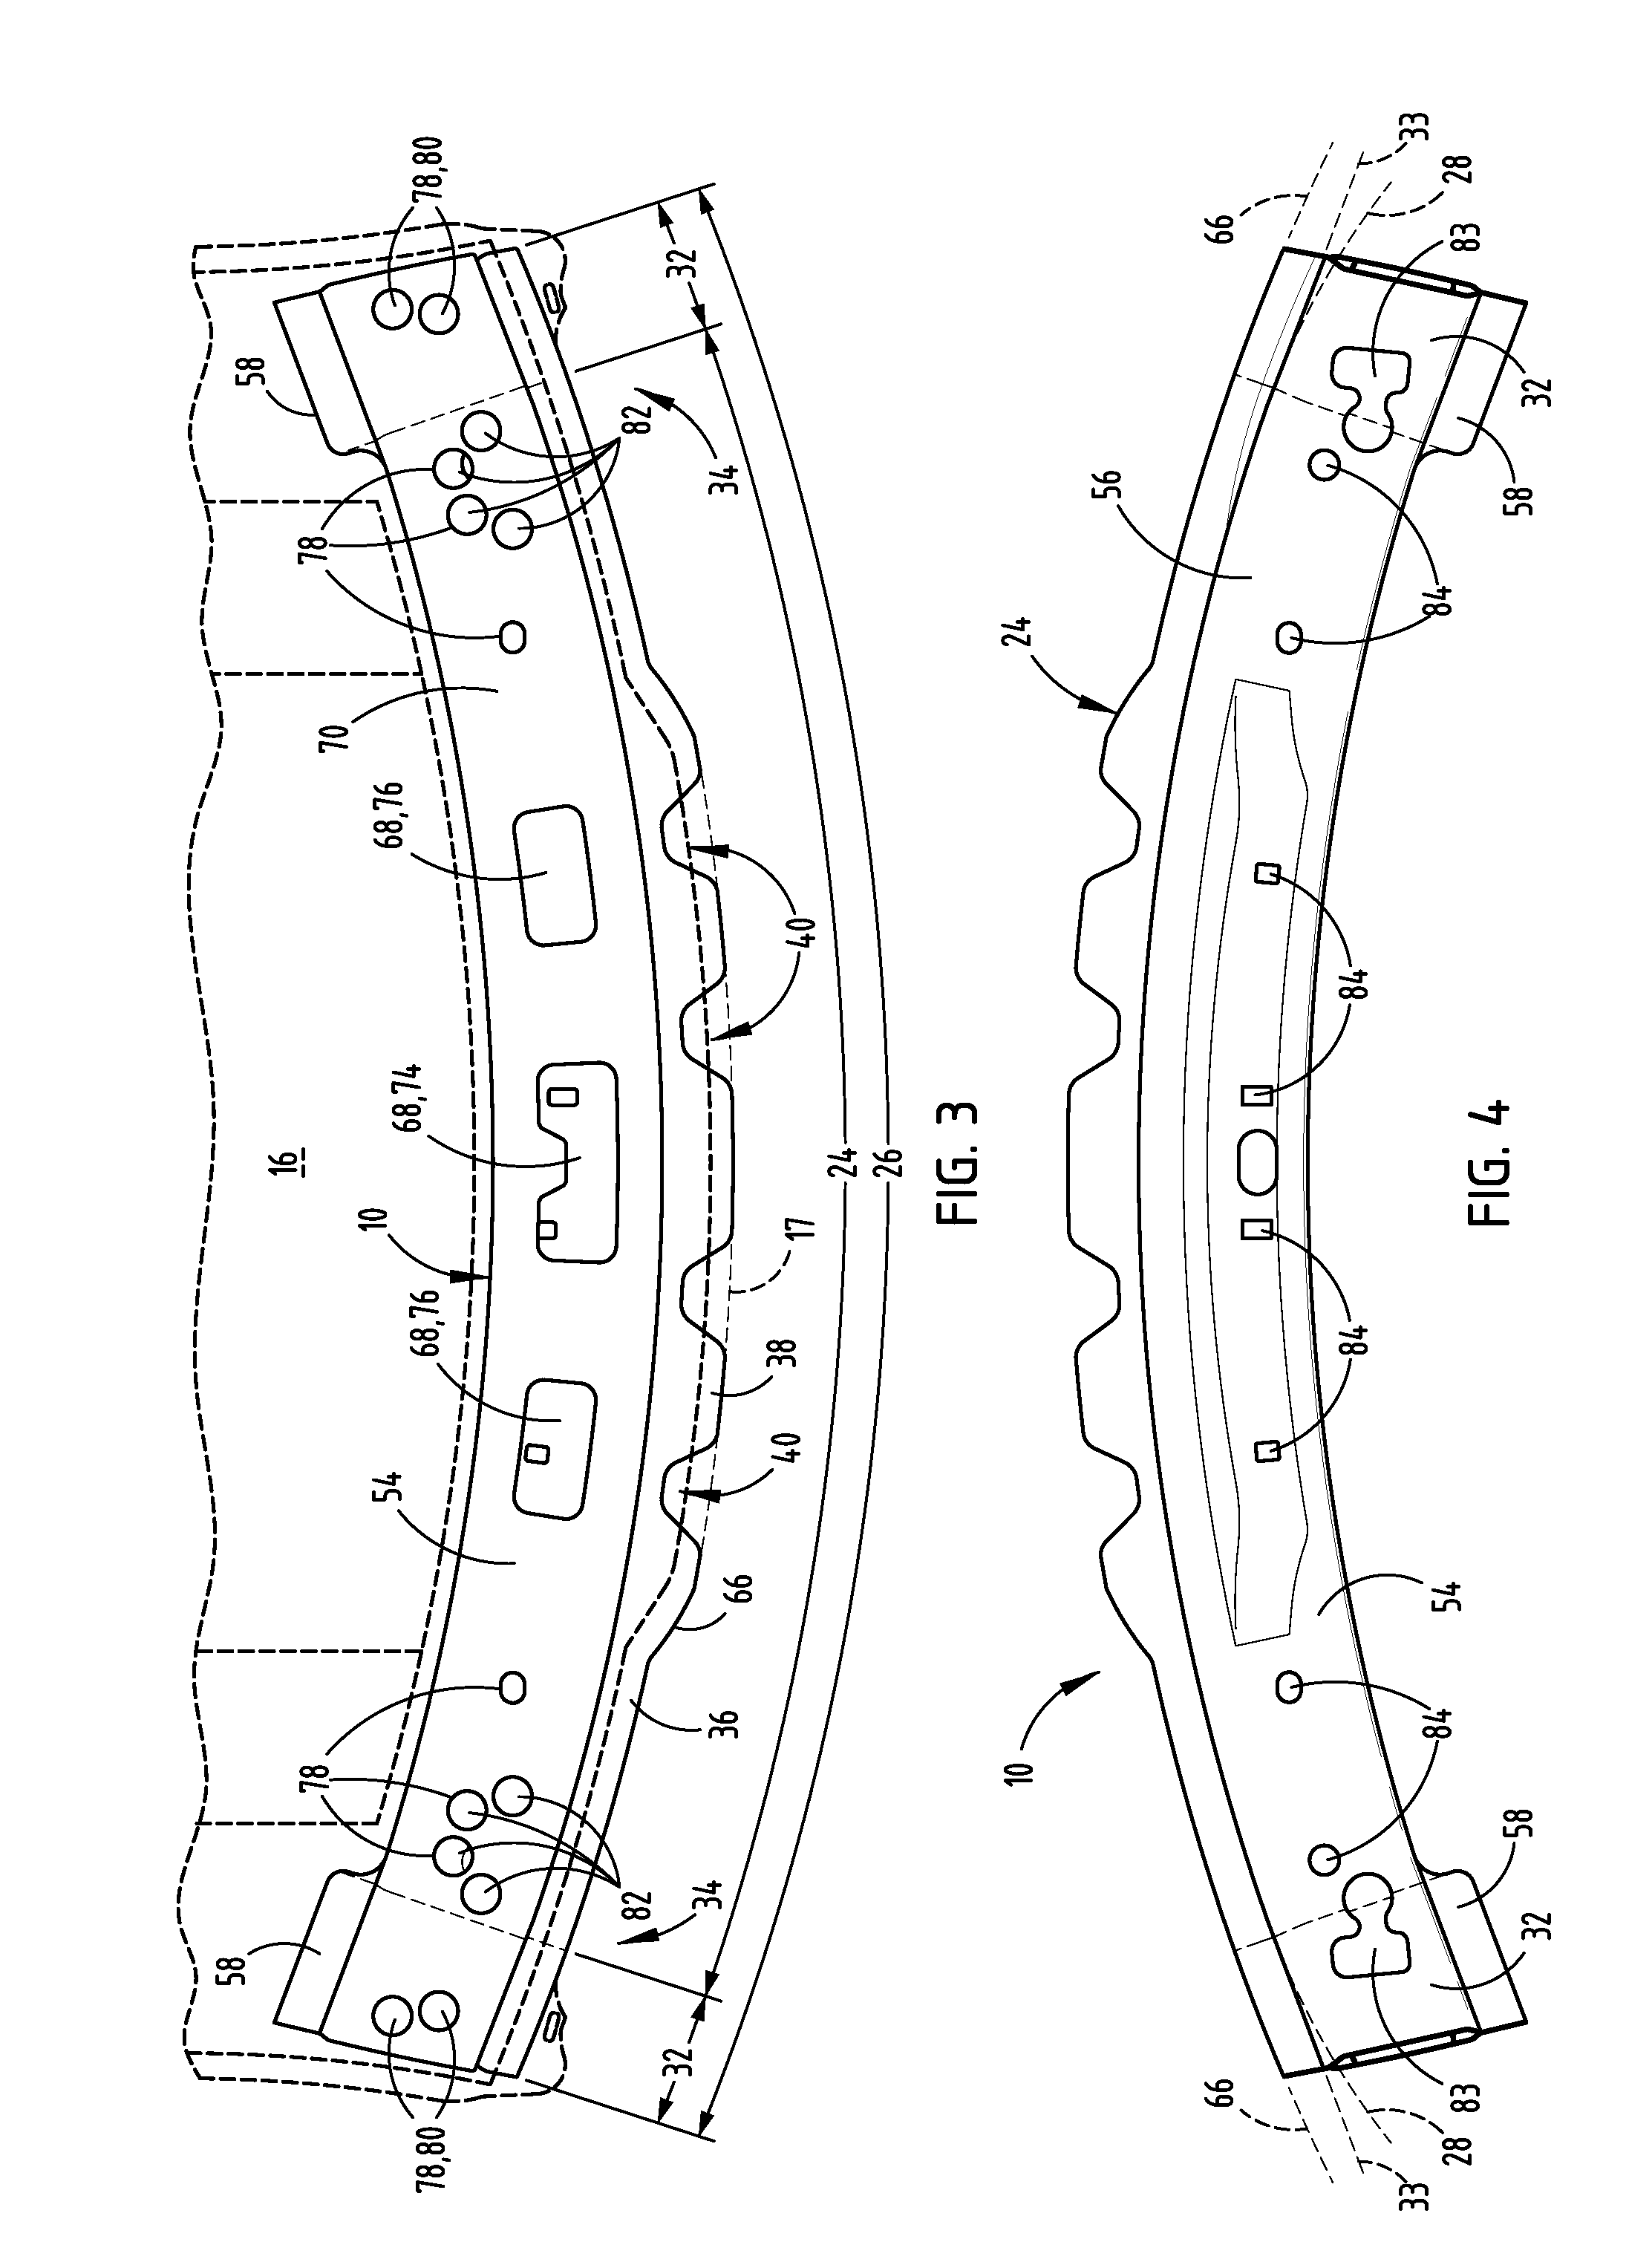 Header beam of a vehicle frame and method of forming the same